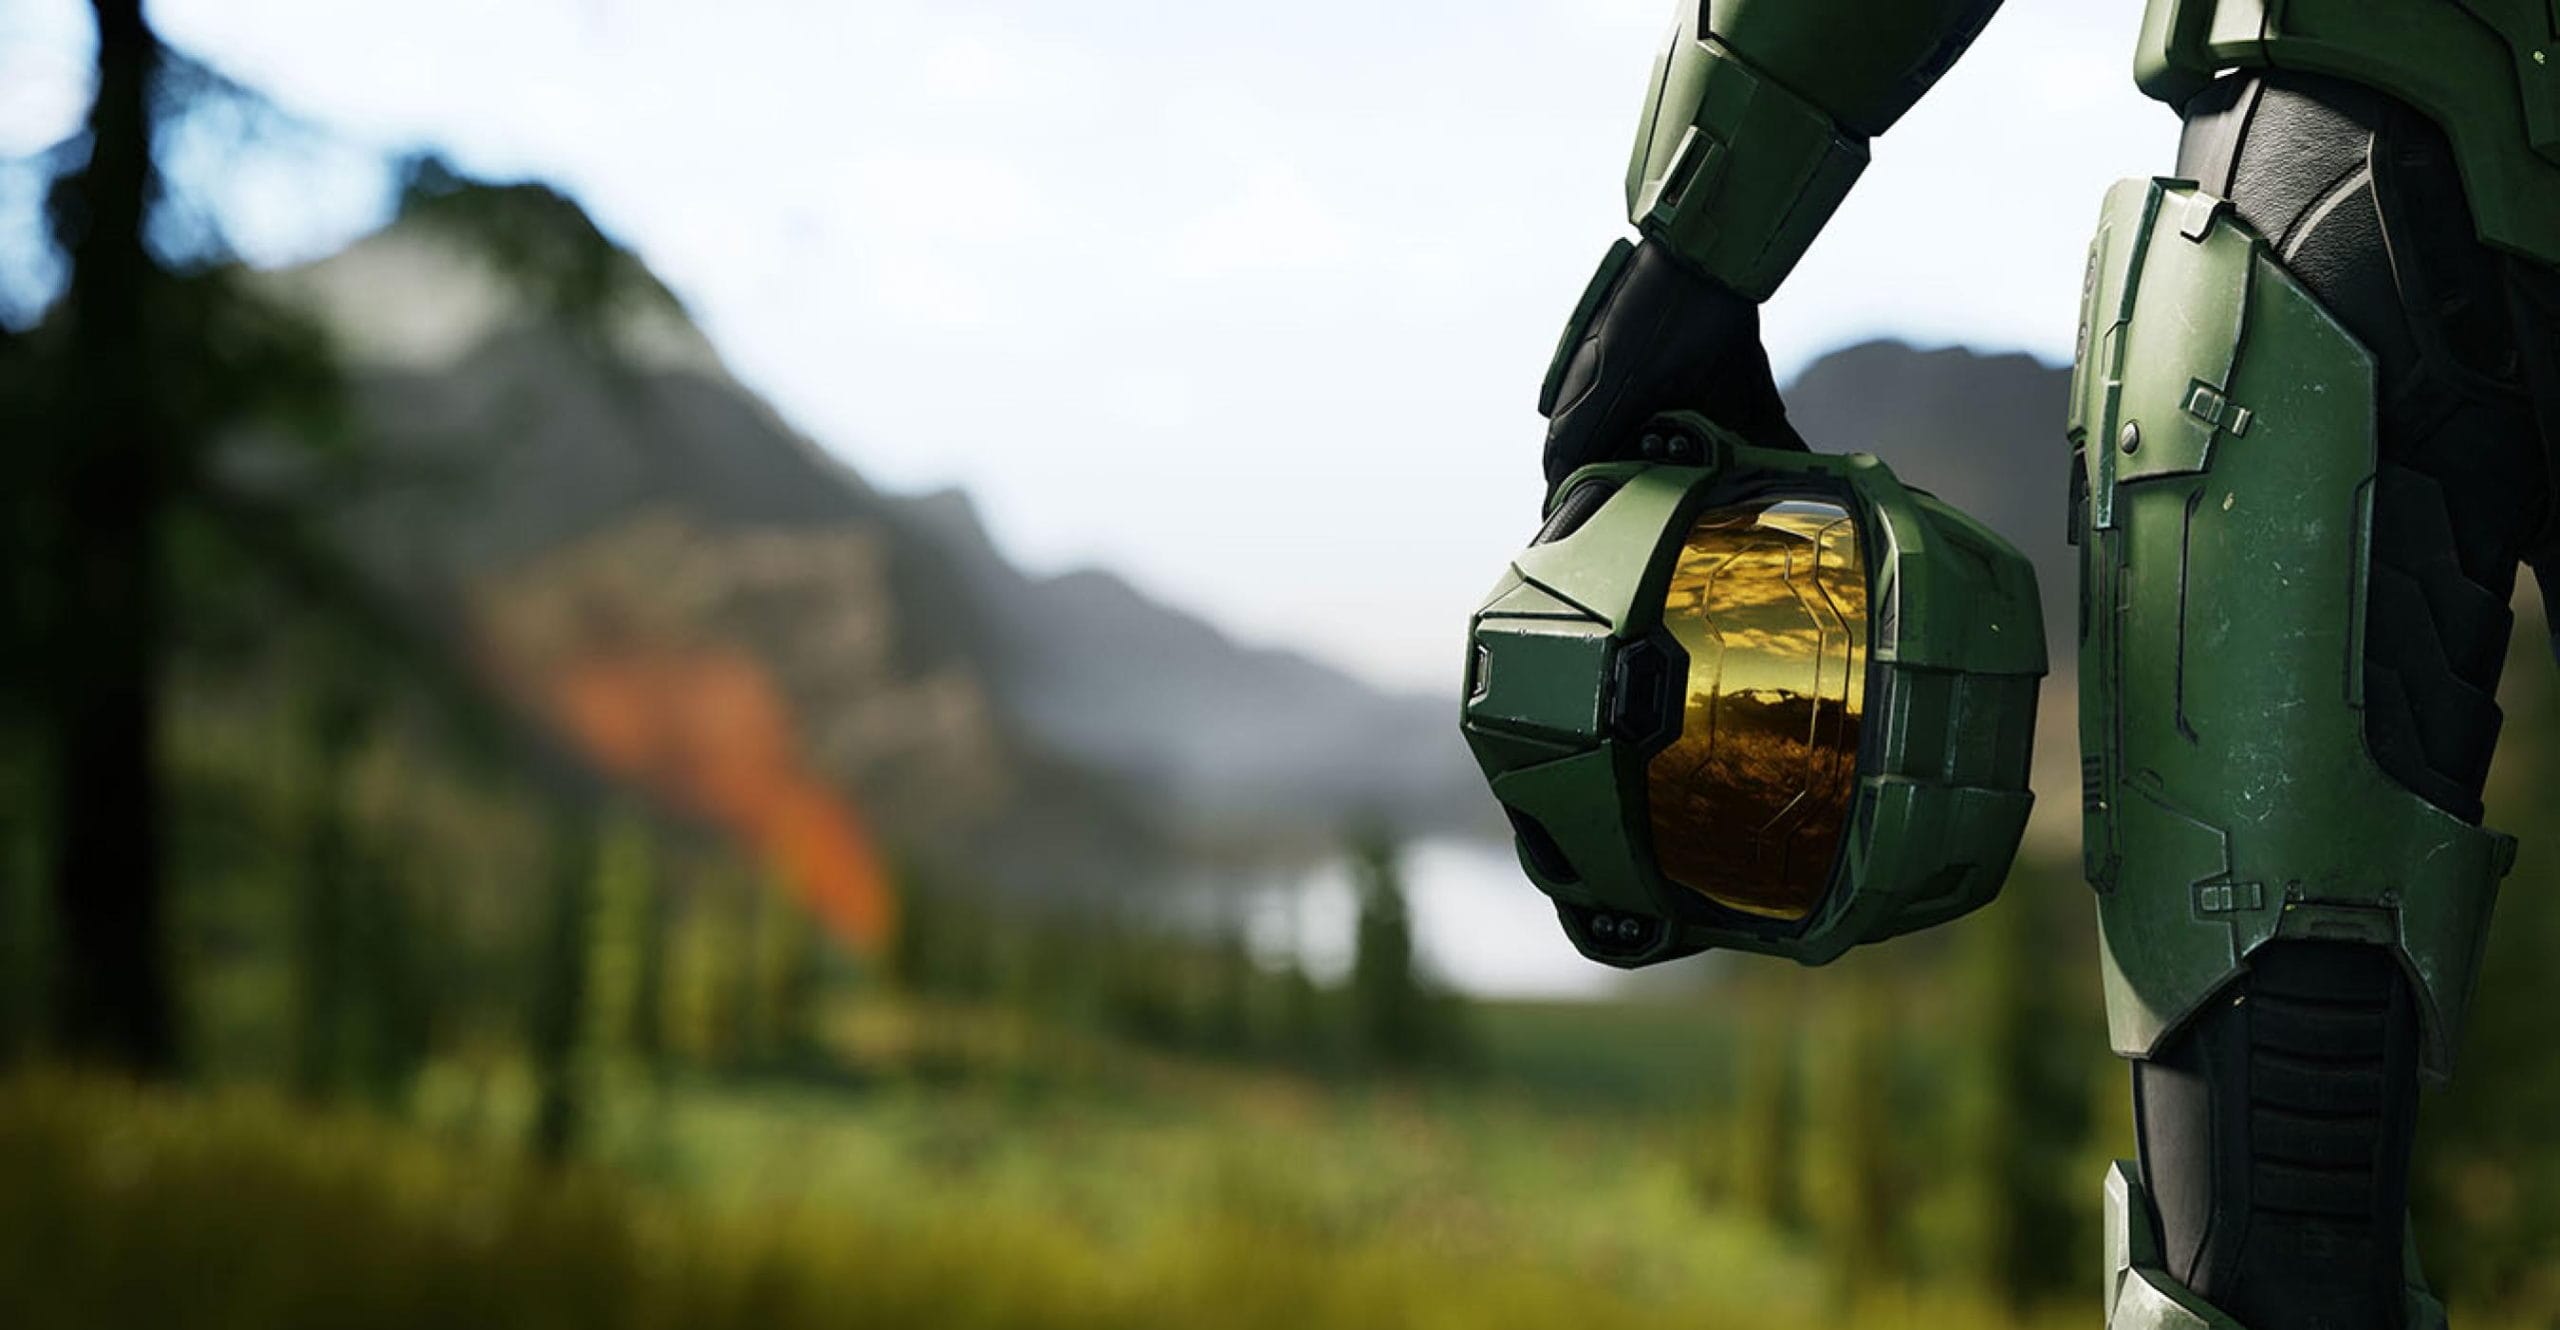 Get Ready to Check Halo Infinite's Campaign During Xbox Games Showcase